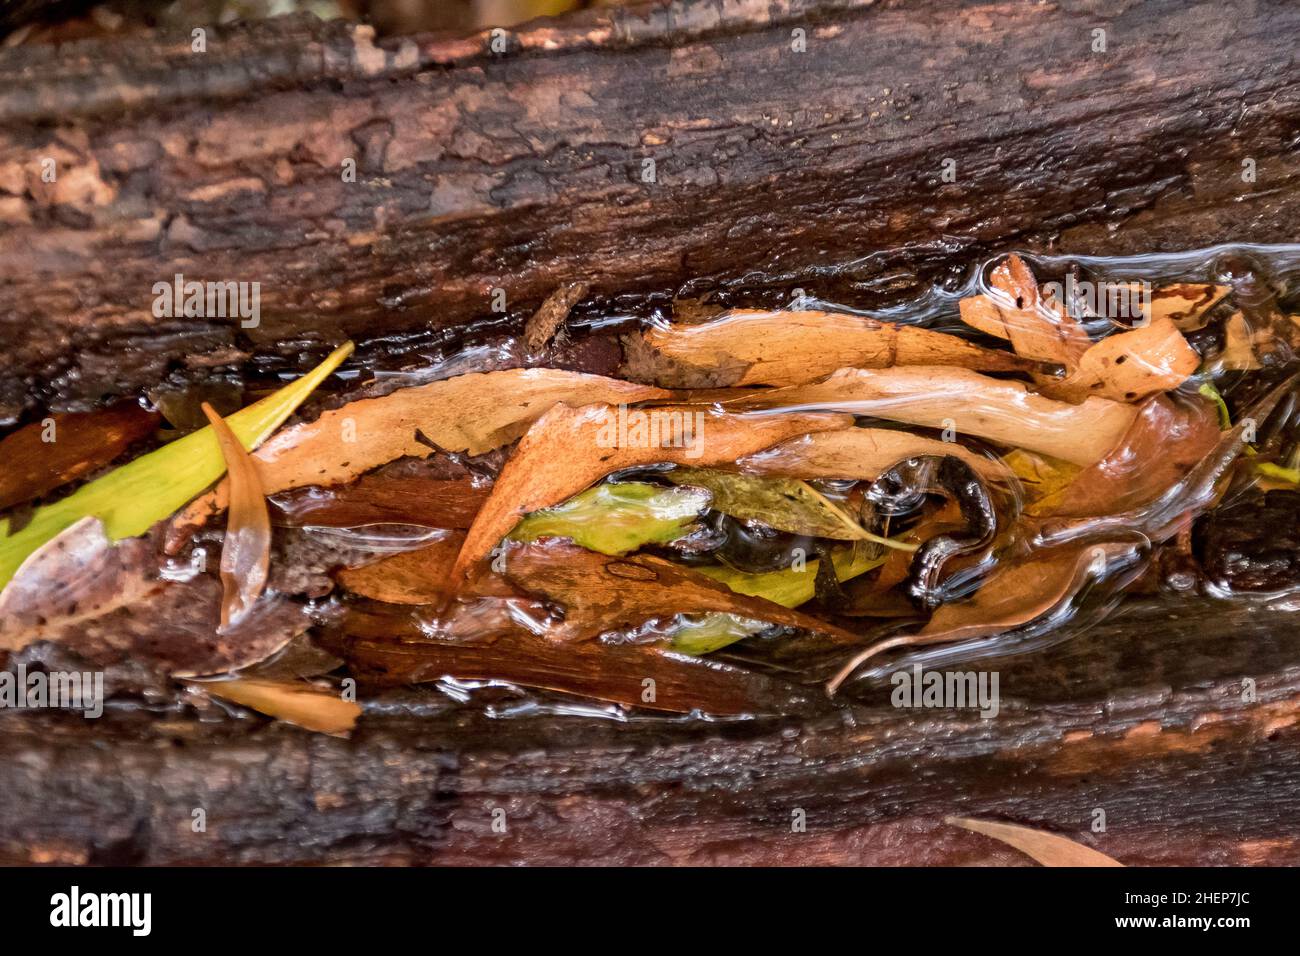 Fallen eucalypt leaves collecting in a puddle in a hollow tree trunk on forest floor of sub-tropical lowland rainforest, Queensland,Australia. Stock Photo